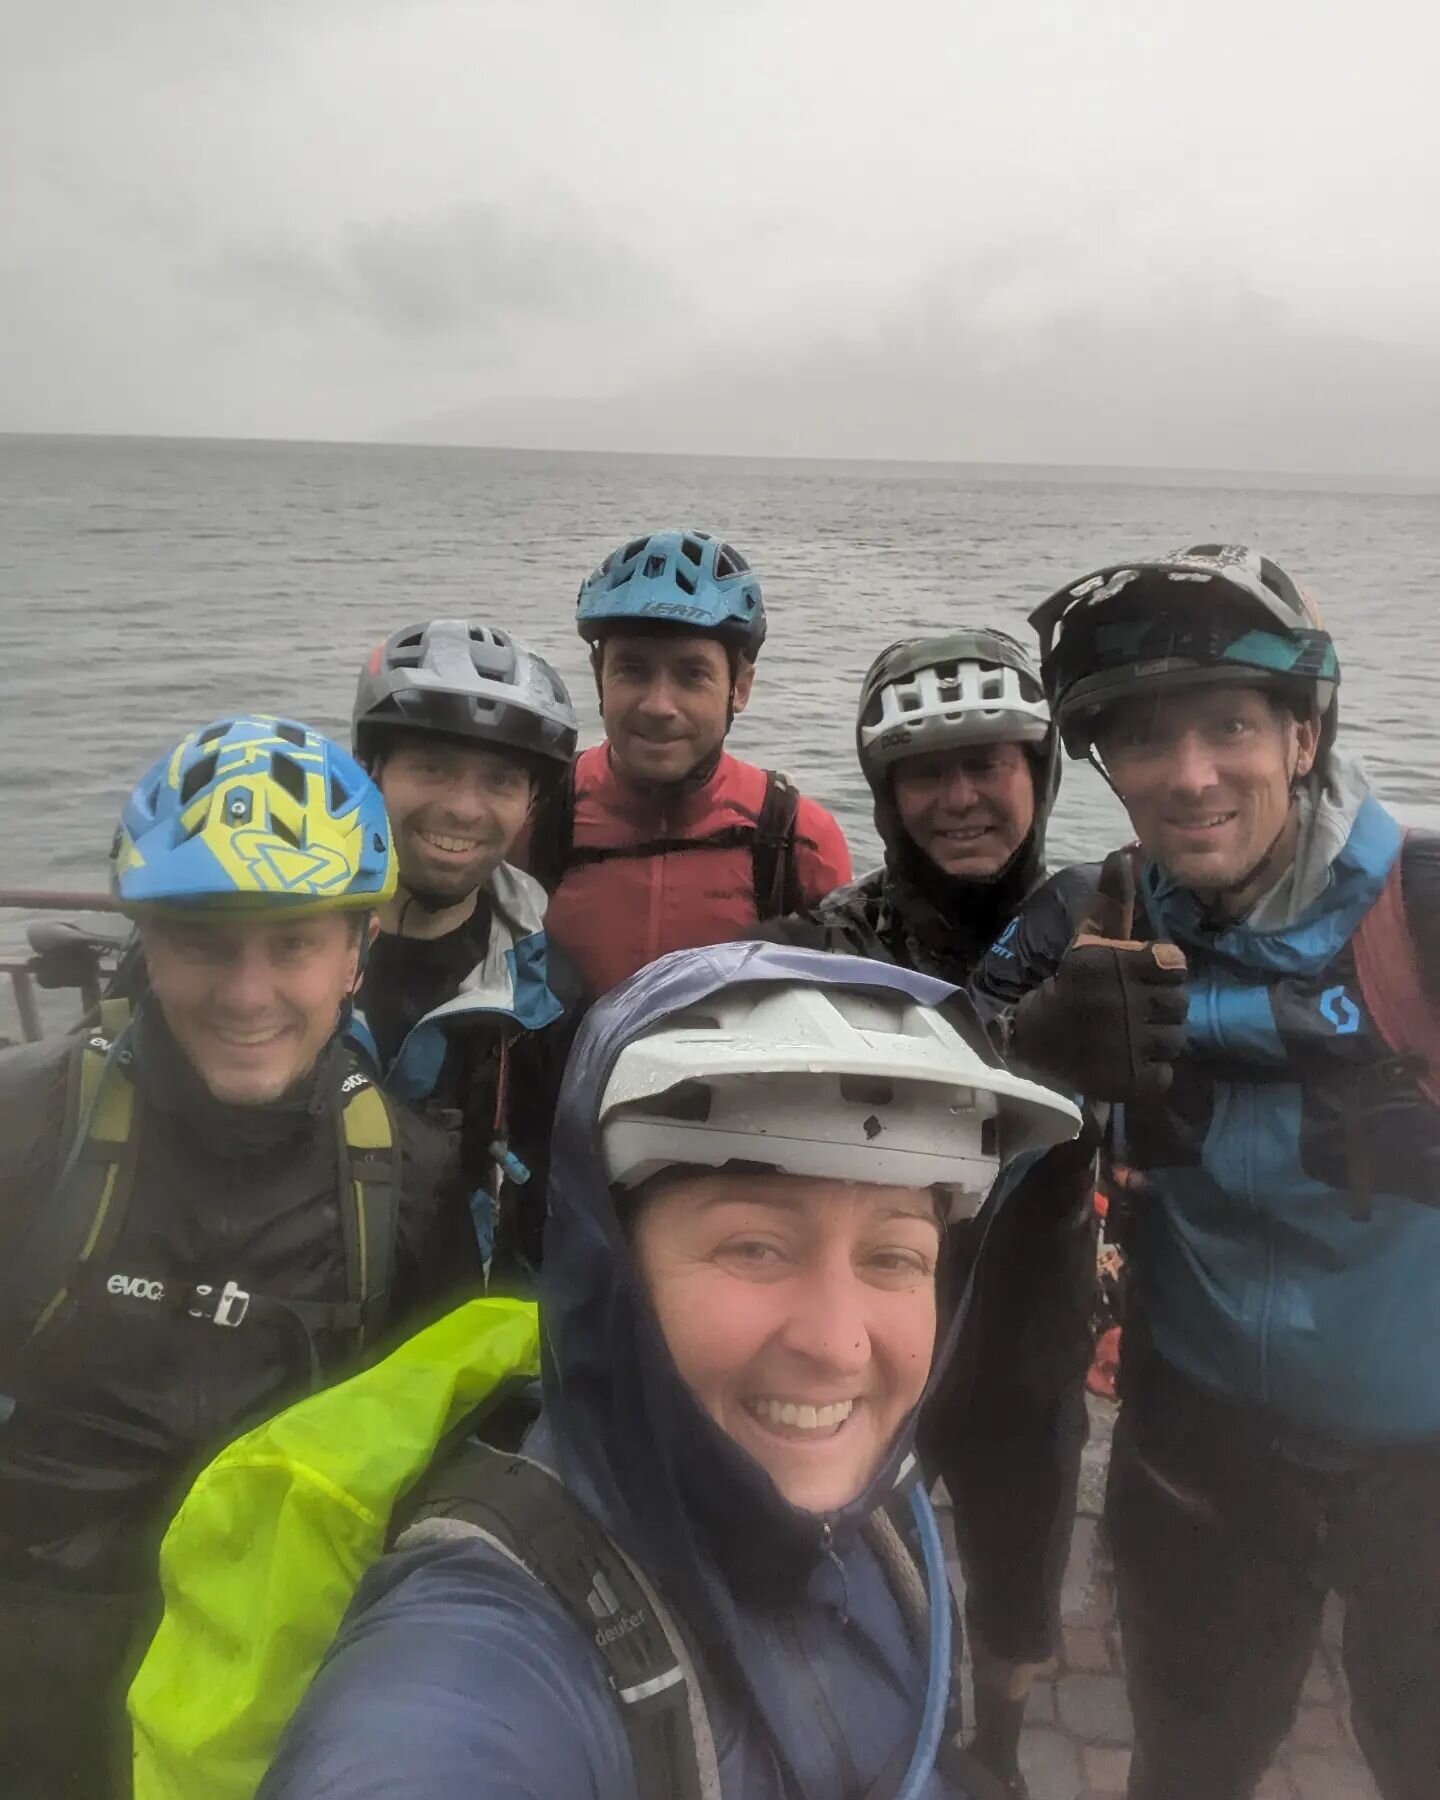 Made it to Lake Como!
The heaviest rain I have ridden in for a while, and not what we normally expect as we ride down to the lake, but spirits stayed high and much fun was had as we rode down trails that had turned to rivers! 😂
That's the end of our